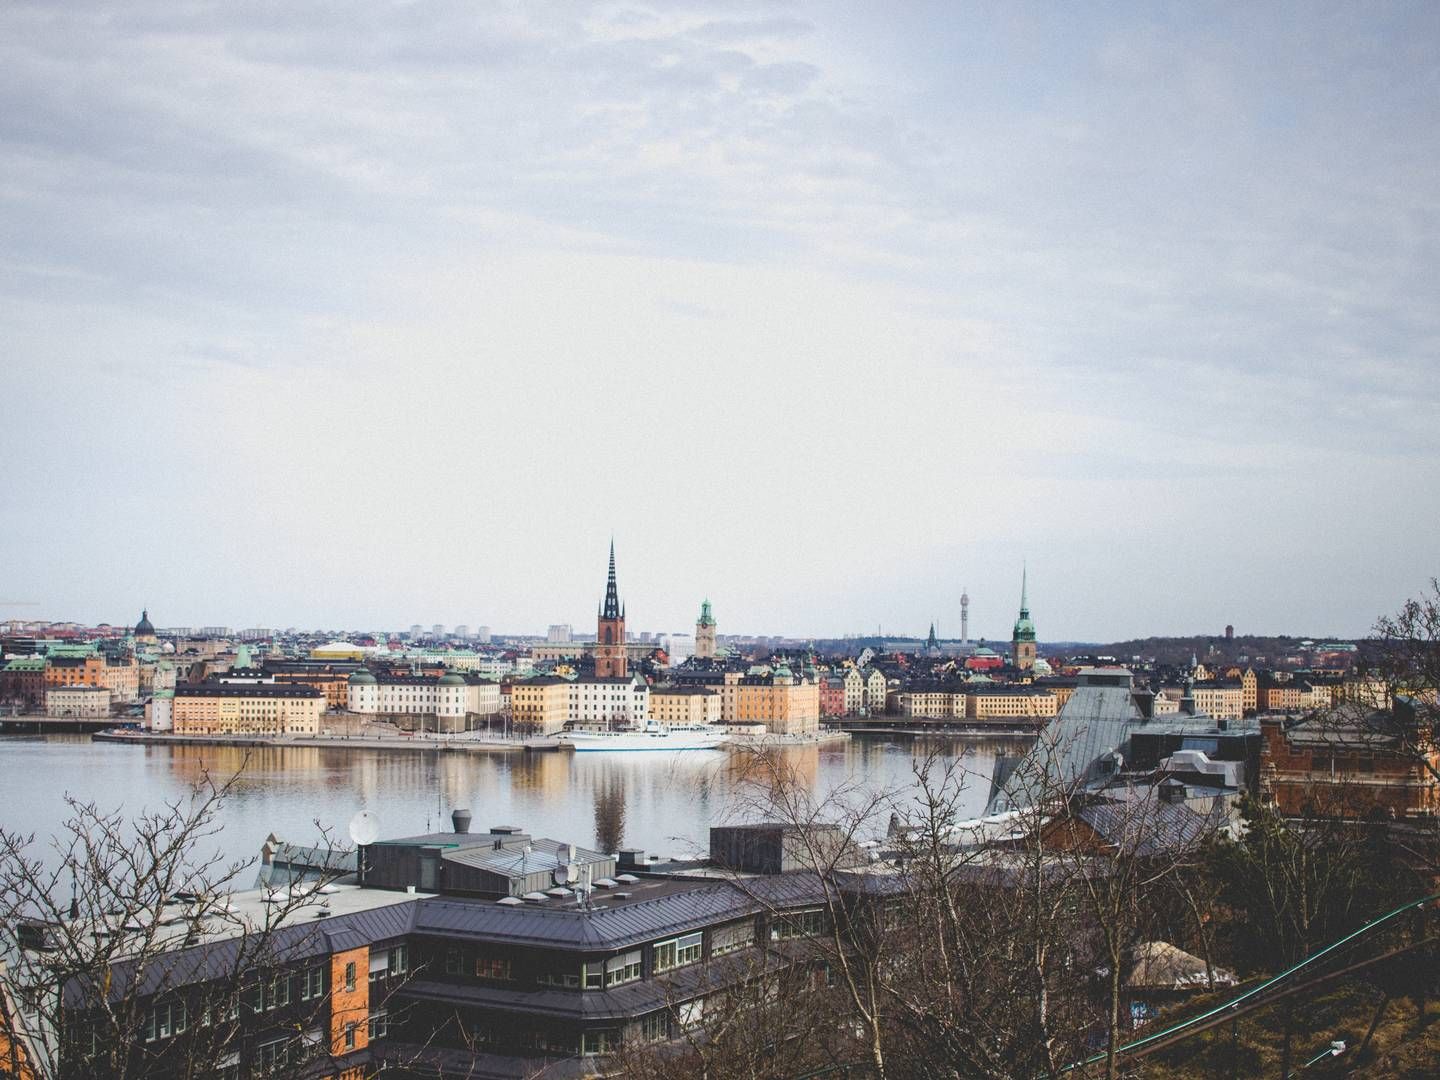 Stockholm-based AMF's Swedish equity investments pulled in a return of 7.2% in H1 this year. | Foto: Pexels: Nadine Wuchenauer.